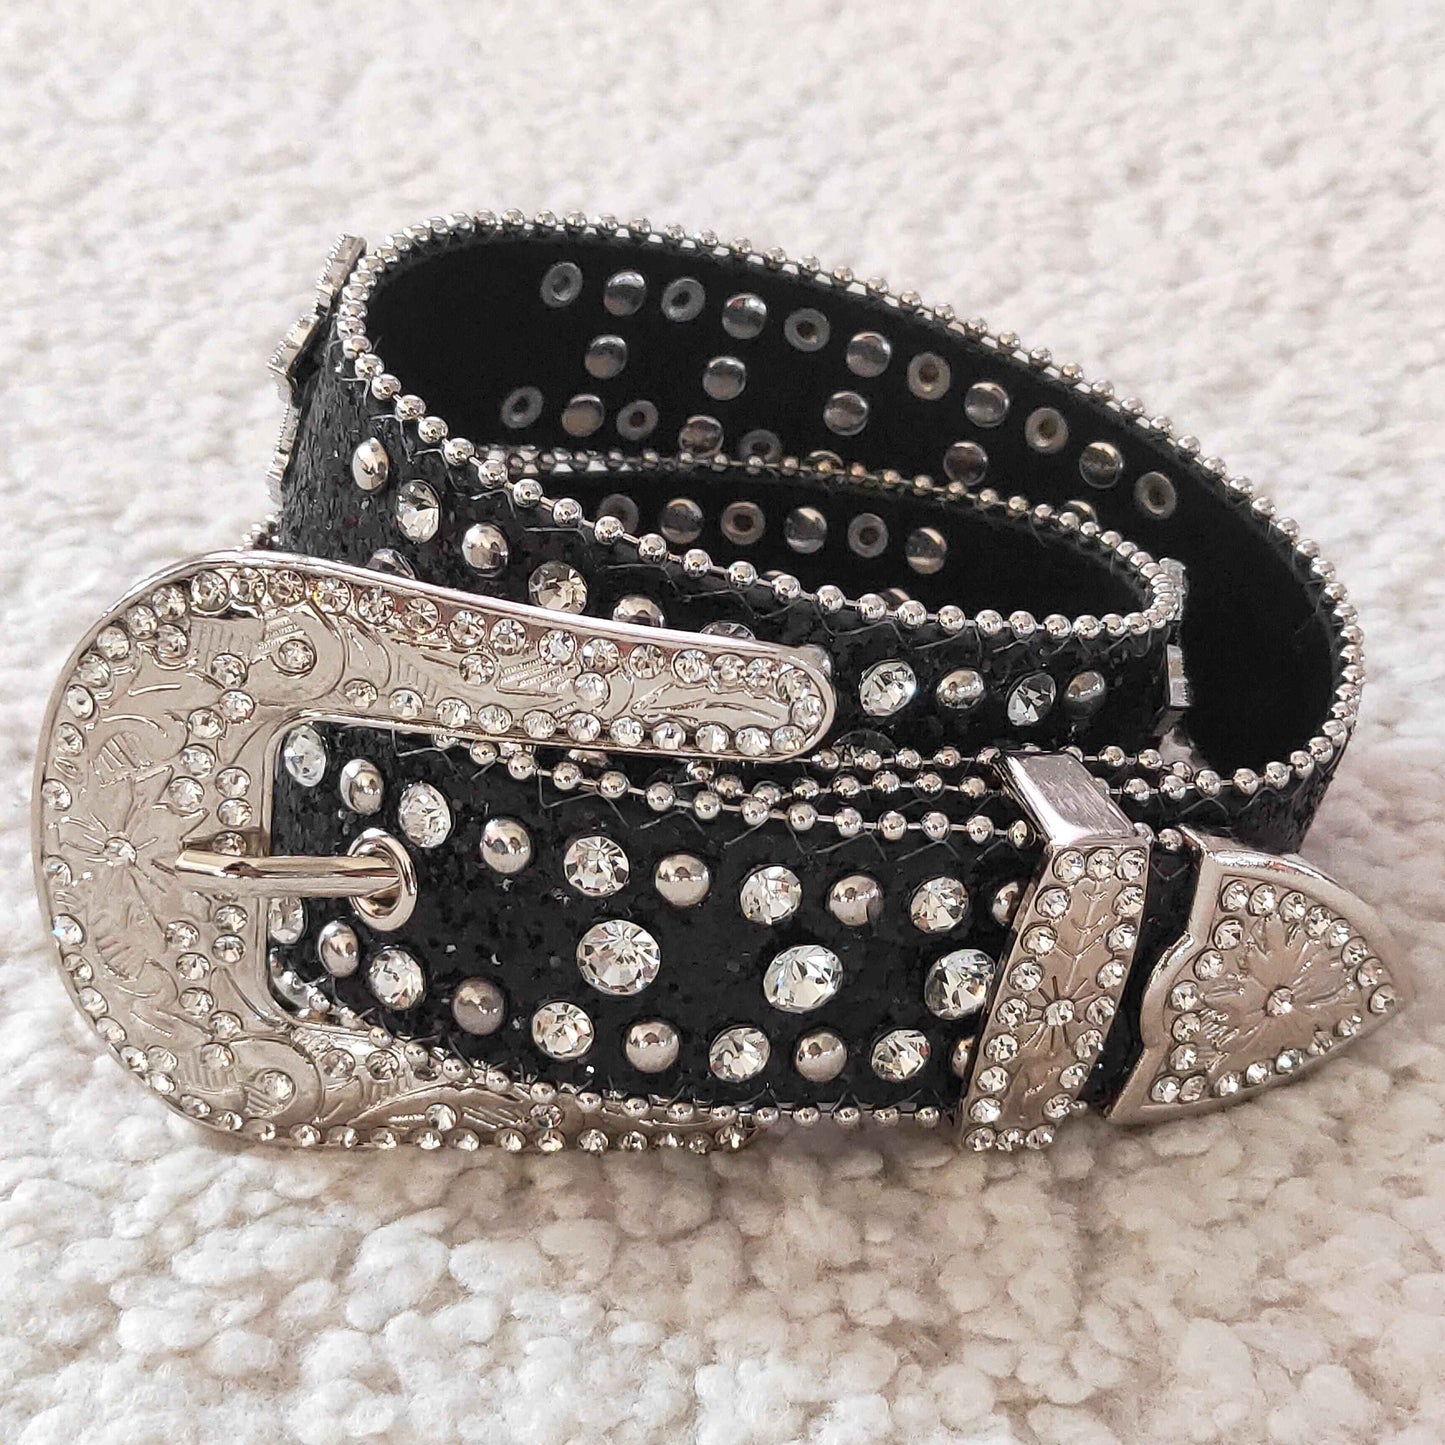 GB0004 ready to ship infants kids fashion bling belt with high quality 31.5inches